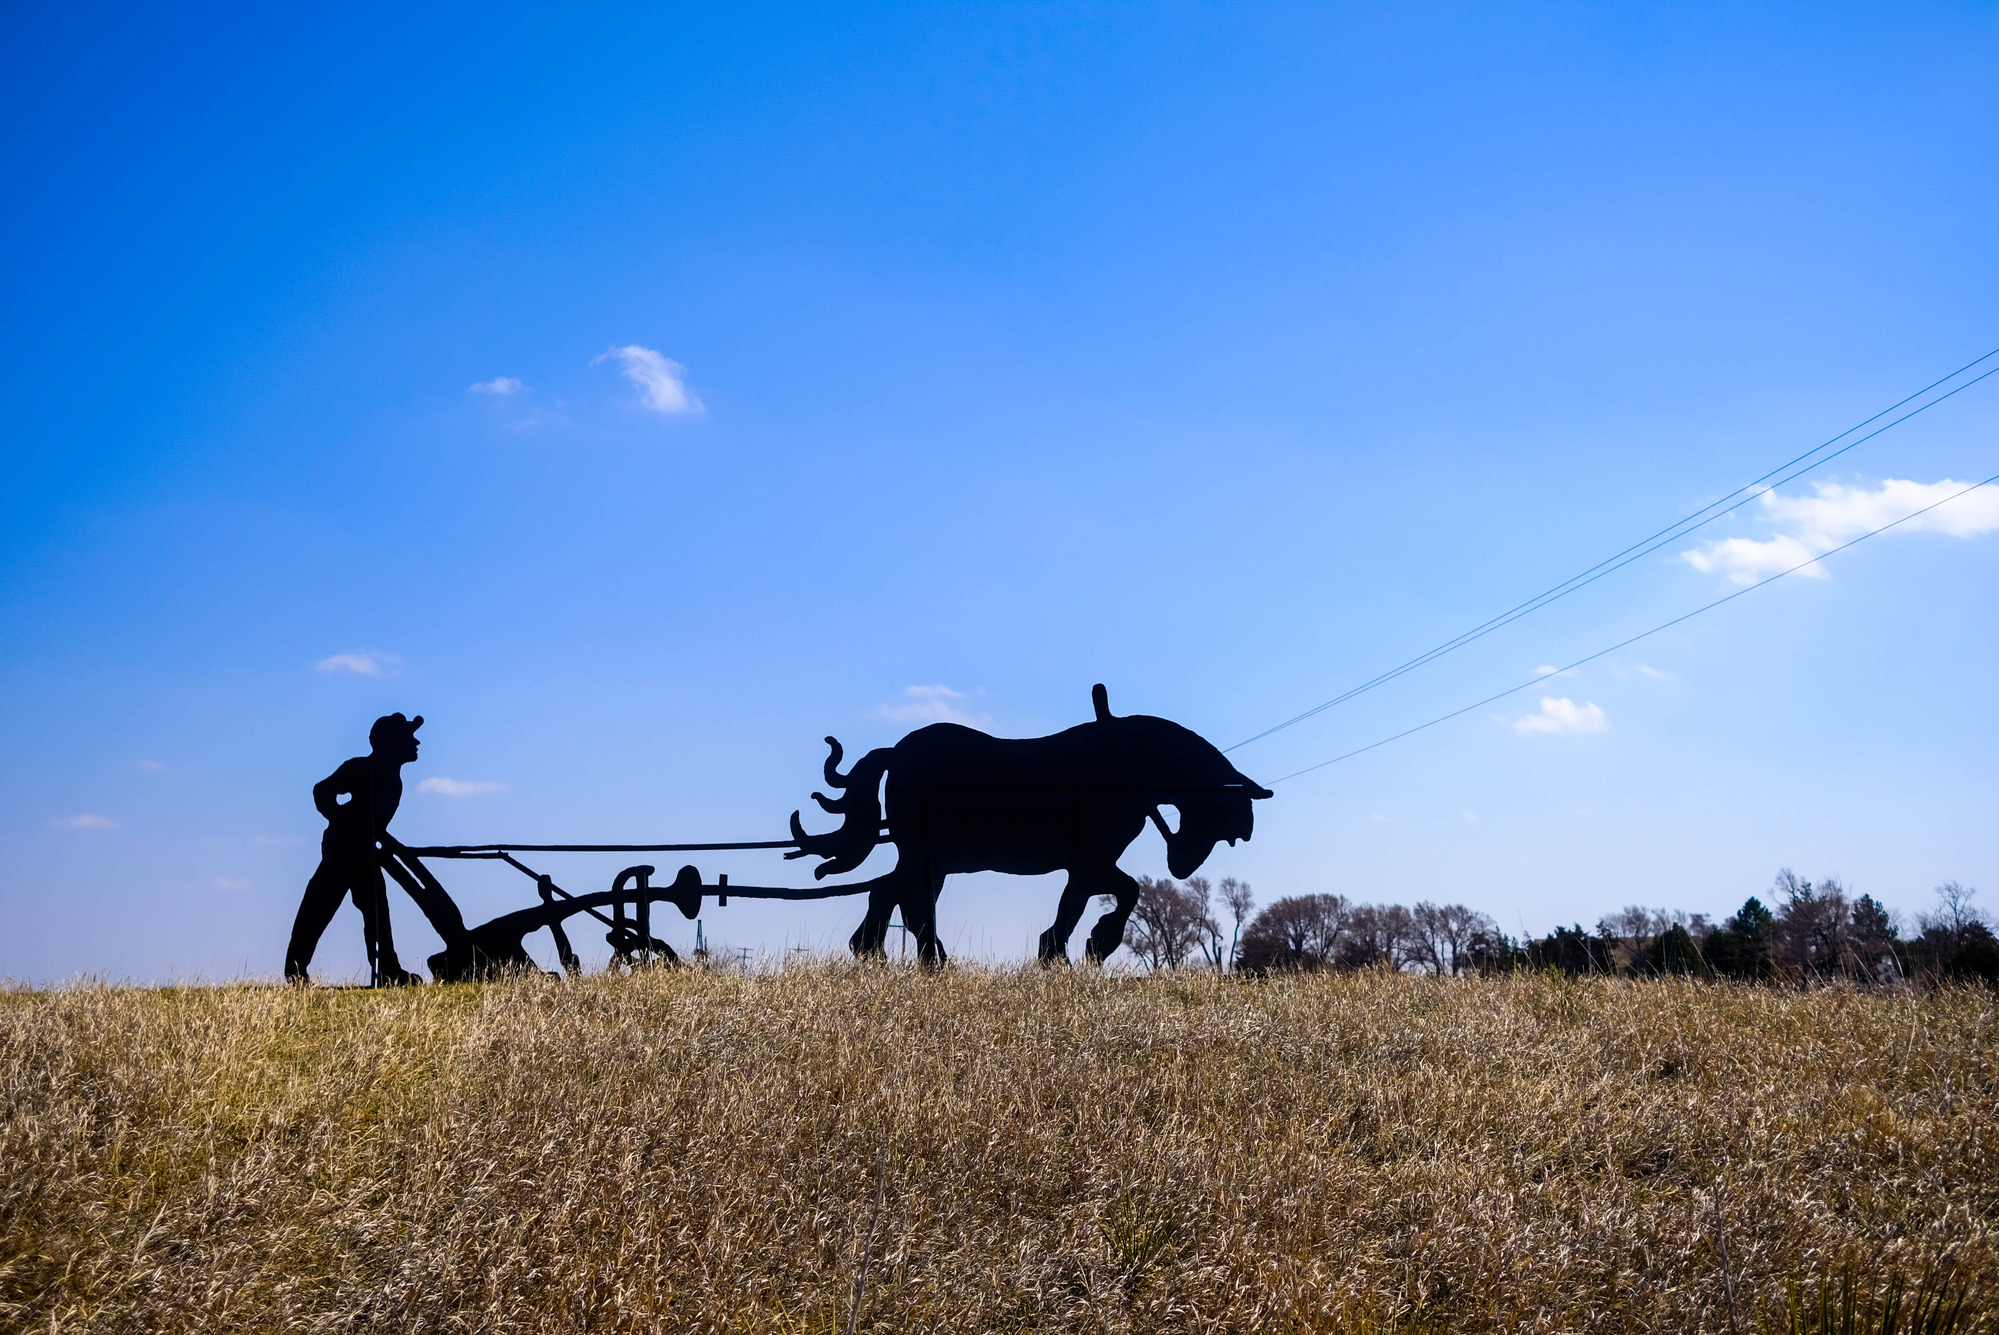 A metal silhouette of a horse and farmer with plow.